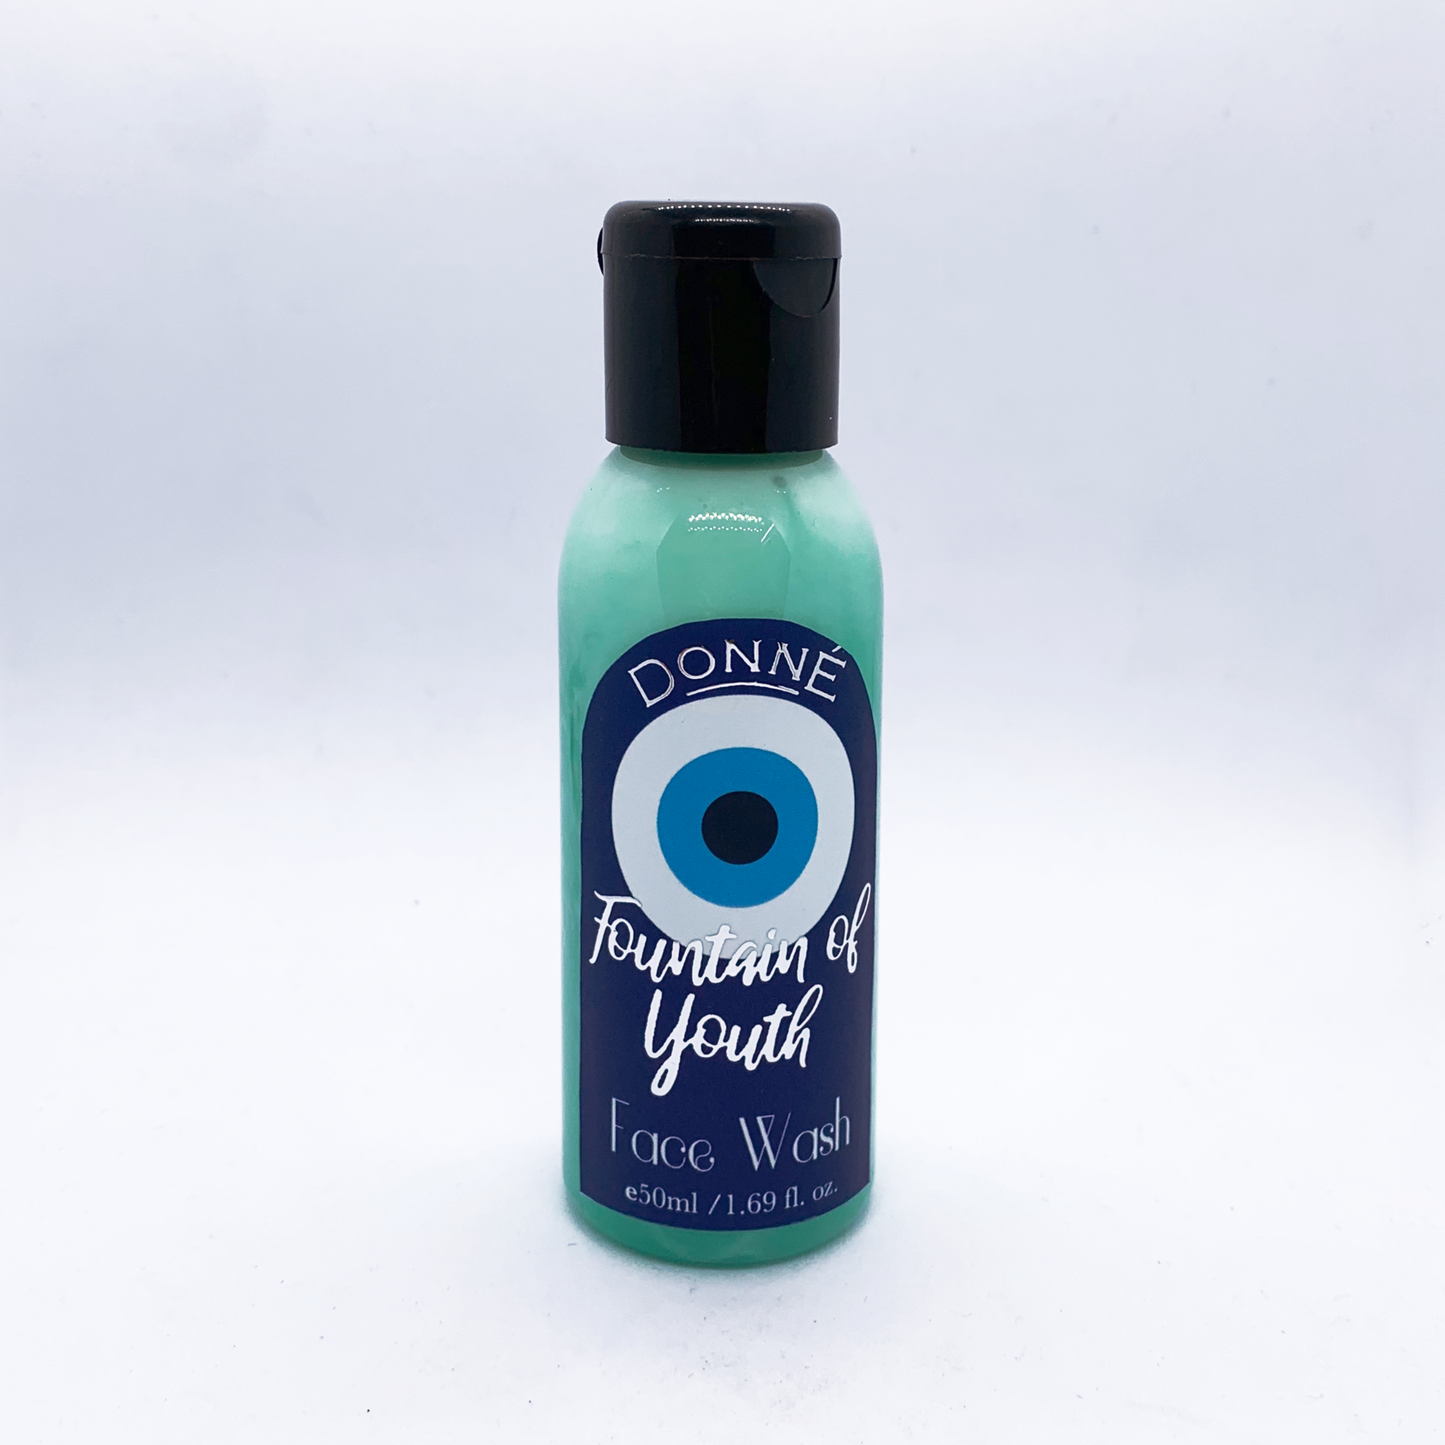 Fountain of Youth - a face wash against a white background with a black lid, evil eye labels with silver accents